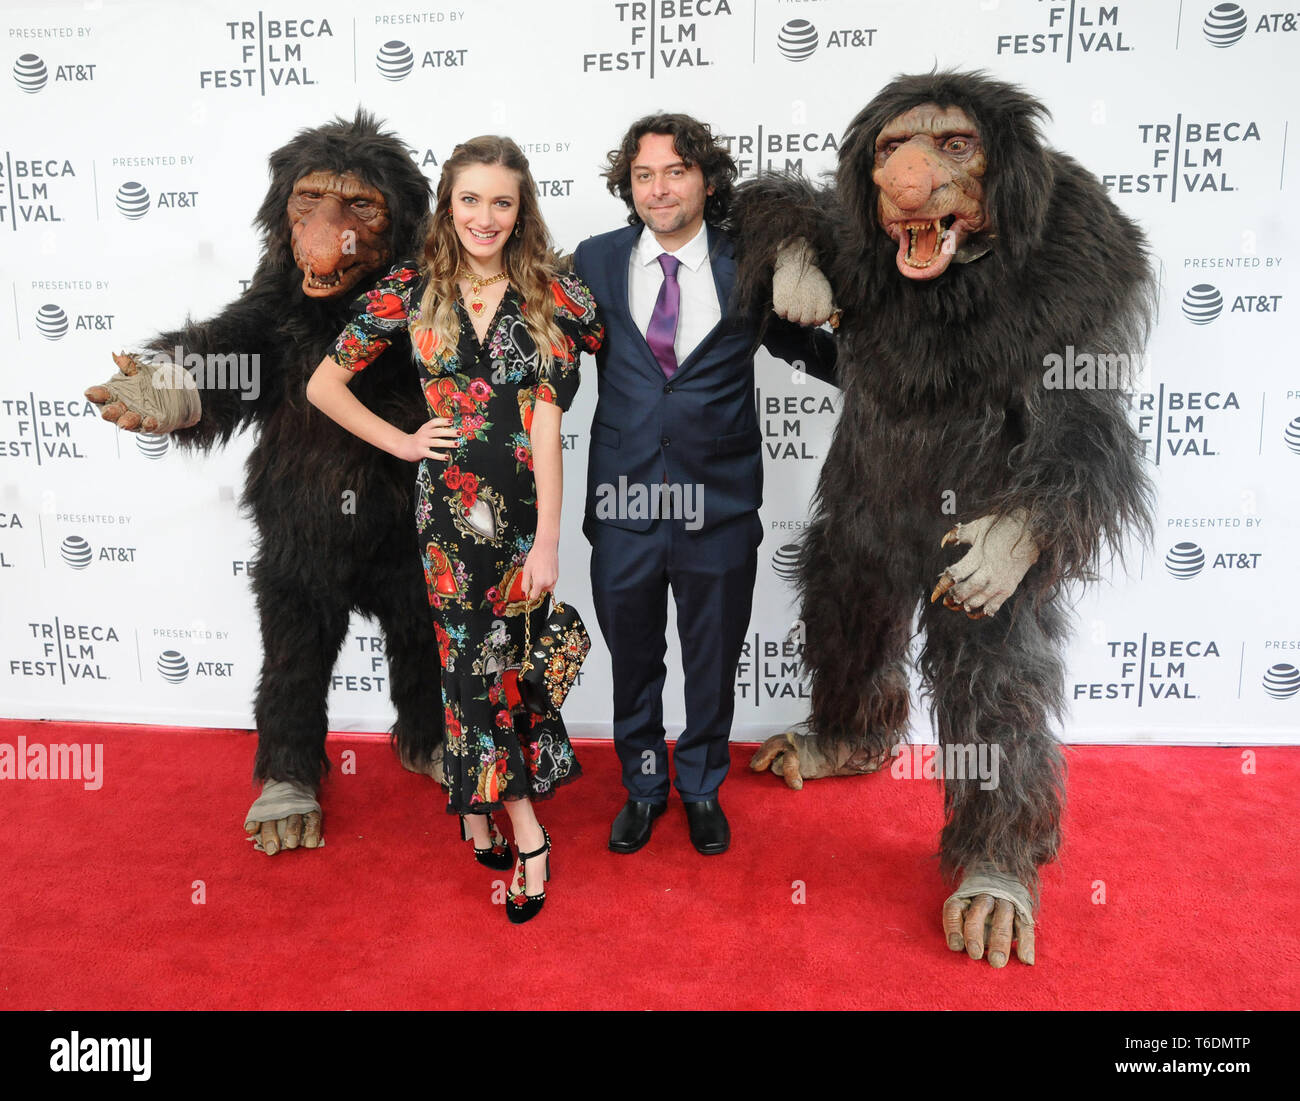 April 27, 2019 - New York, New York, U.S. - Nicole Elizabeth Berger, Mario Torres and Grumblers at the 2019 Tribeca Film Festival Premiere of ''The Place Of No Words'', held at the SVA Theater in Chelsea in New York, New York, USA, 27 April 2019 (Credit Image: © Ylmj/AdMedia via ZUMA Wire) Stock Photo